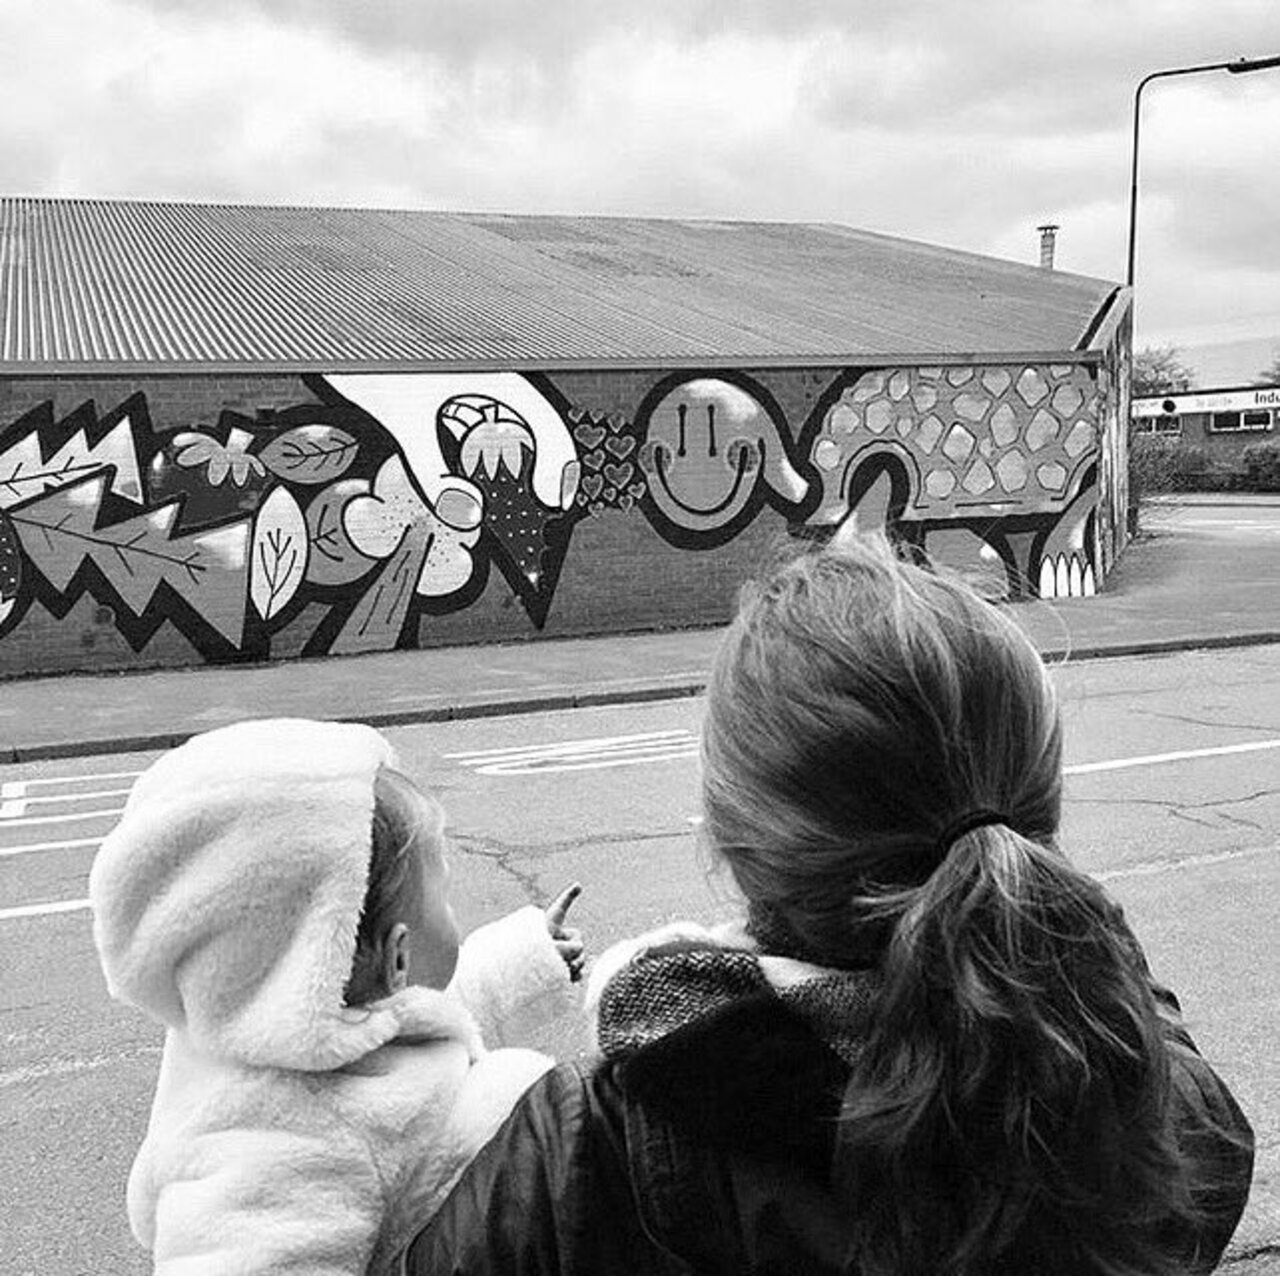 This photo captures what Bankside Gallery is all about perfectly. We want to give artists the opportunity to get their work seen, make the area more interesting, bring people together & be as inclusive as possible. Thanks to Sarah Moor for this shot. #hull #streetart #graffiti https://t.co/VC0zIah087